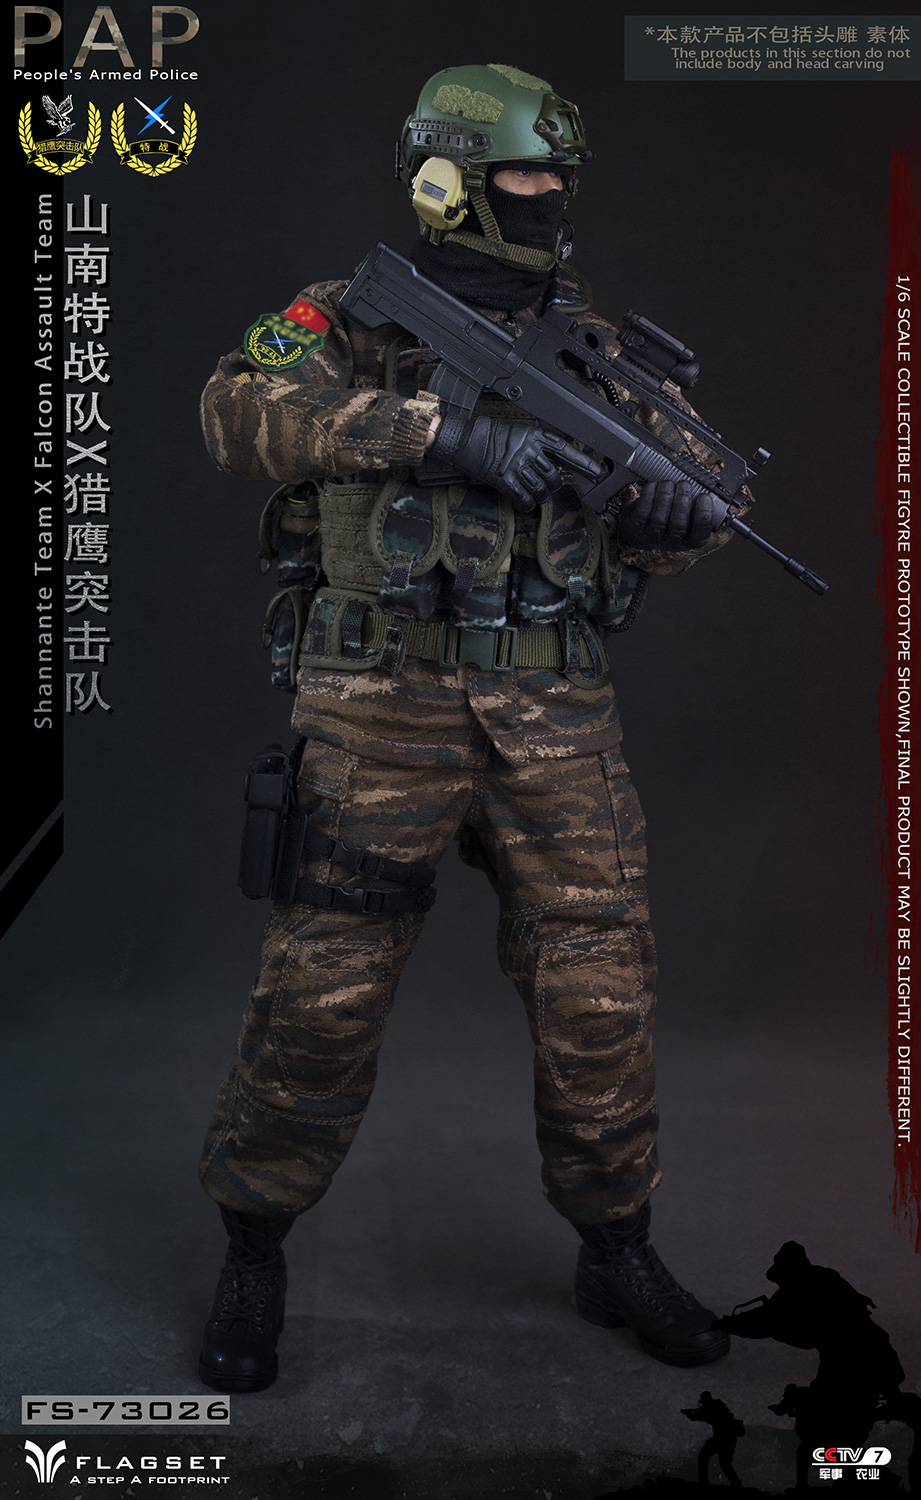 accessories - NEW PRODUCT: Flagset: 1/6 Chinese armed police special team - Shannan detachment / Falcon commando Wudong camouflage suit (FS73026#) 01104410